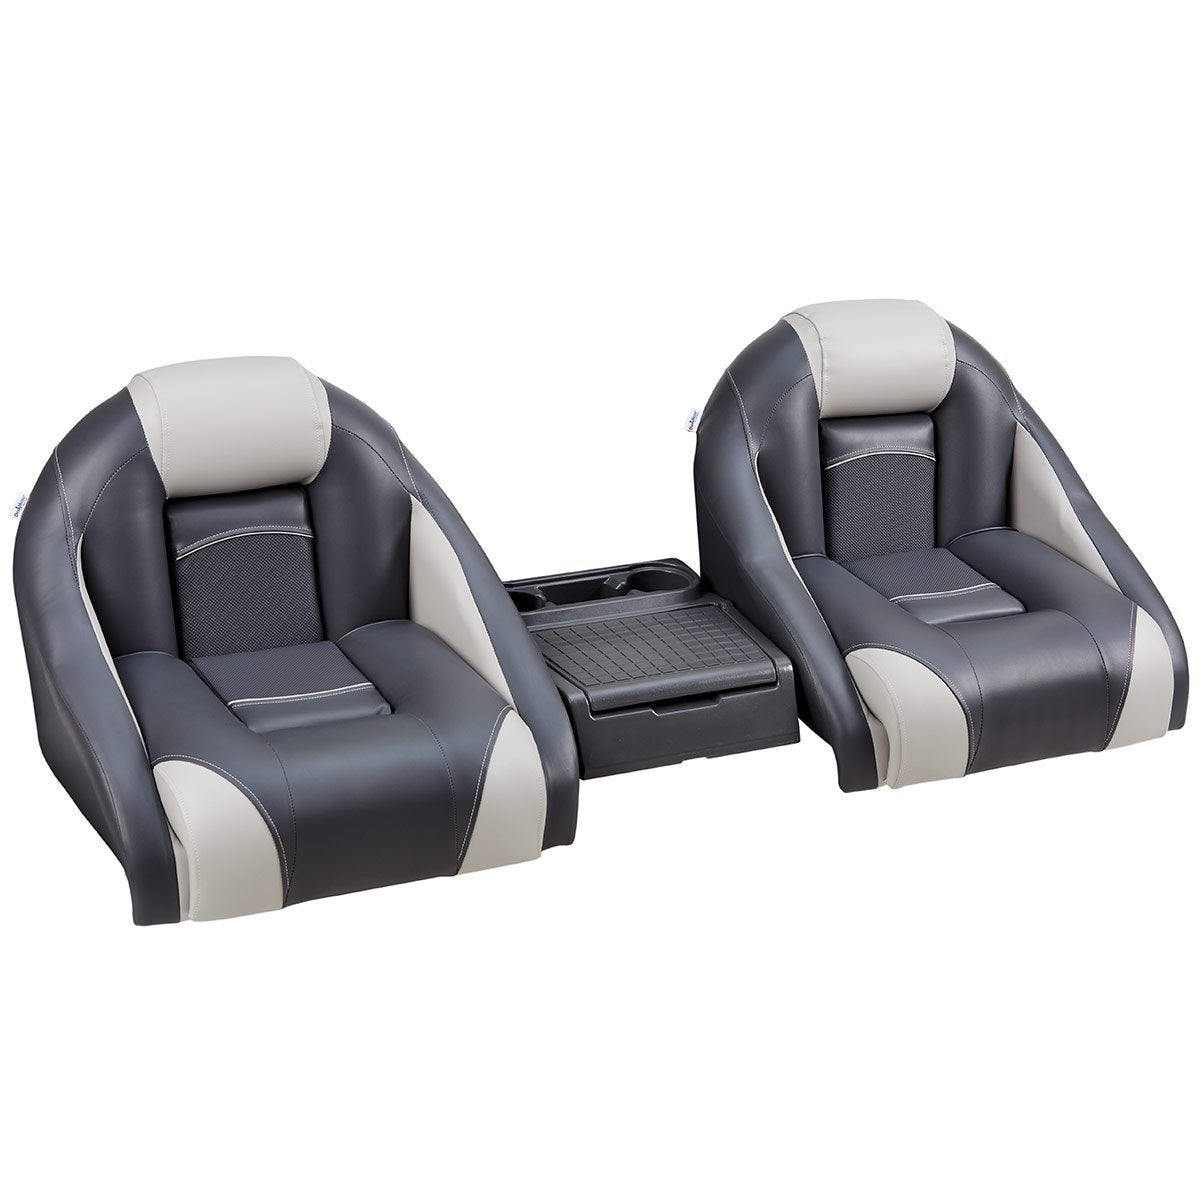 Ranger Bass Boat Seats with Center Storage Console